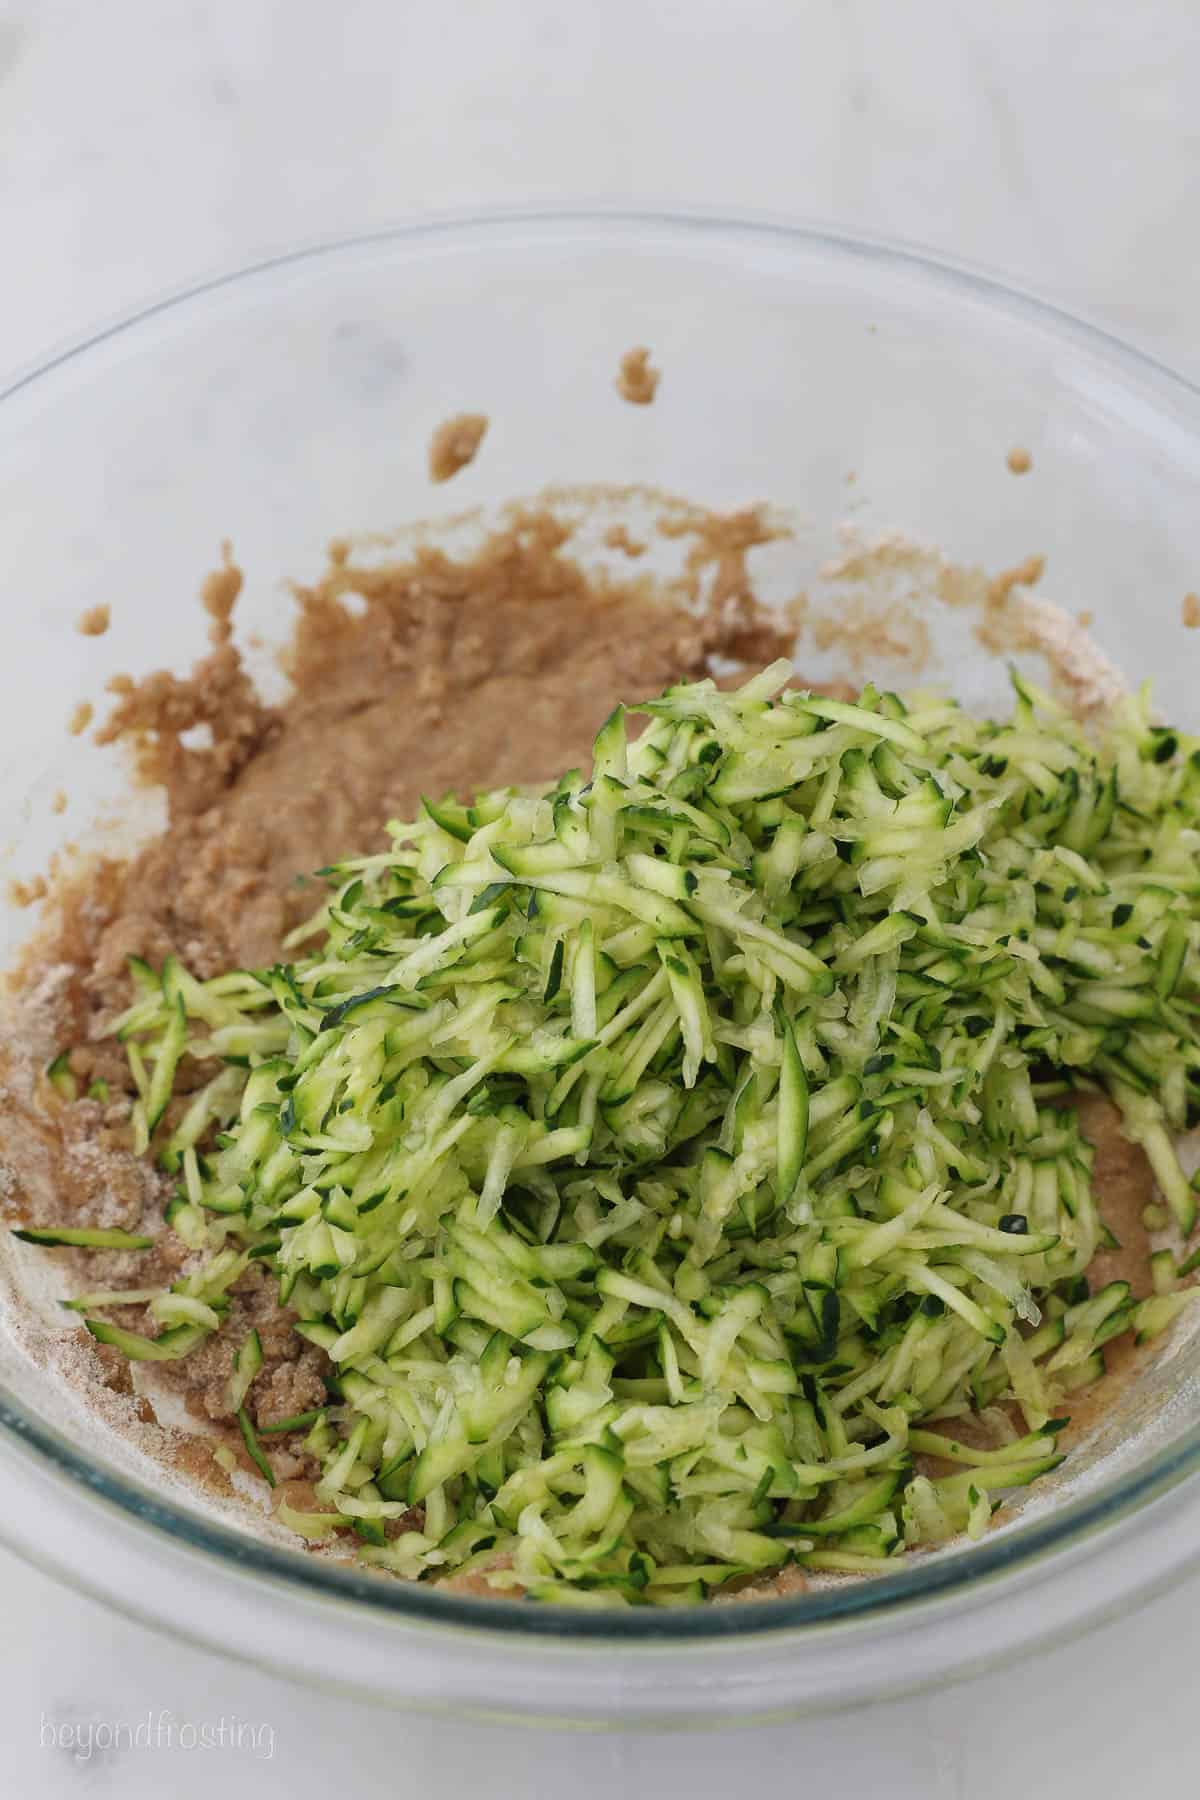 grated zucchini and batter for zucchini bread in a glass mixing bowl